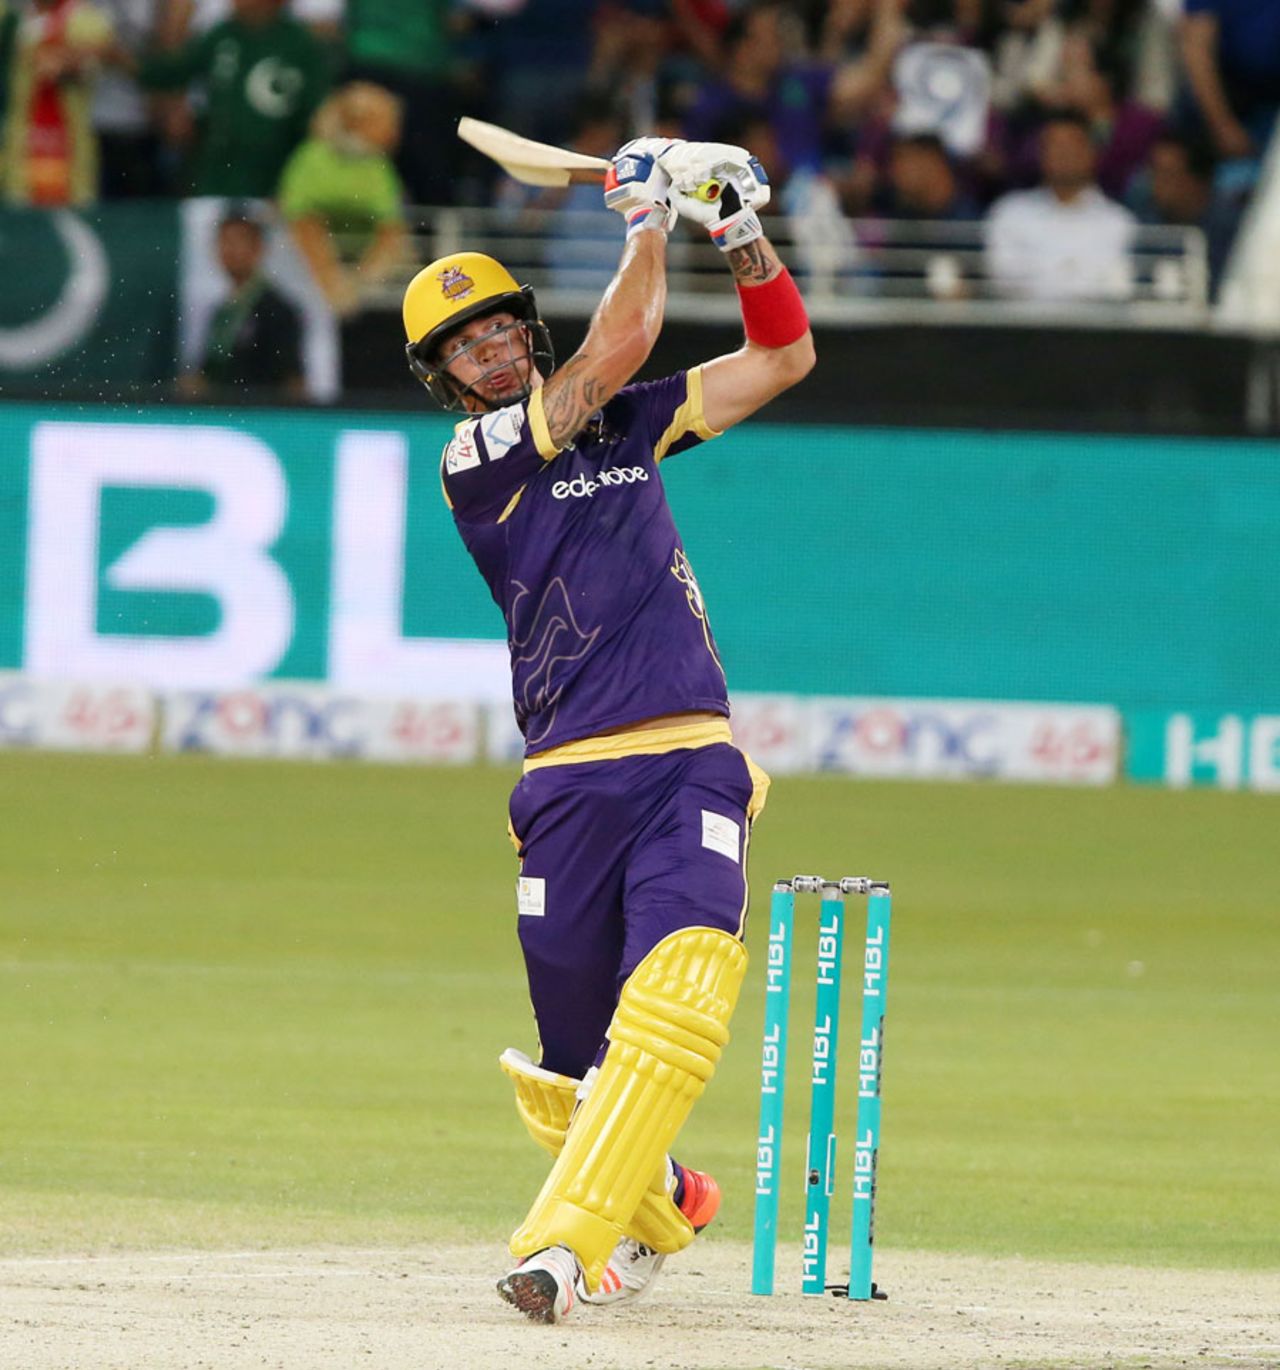 Kevin Pietersen goes over the top, Islamabad United v Quetta Gladiators, PSL final, Dubai, February 23, 2016